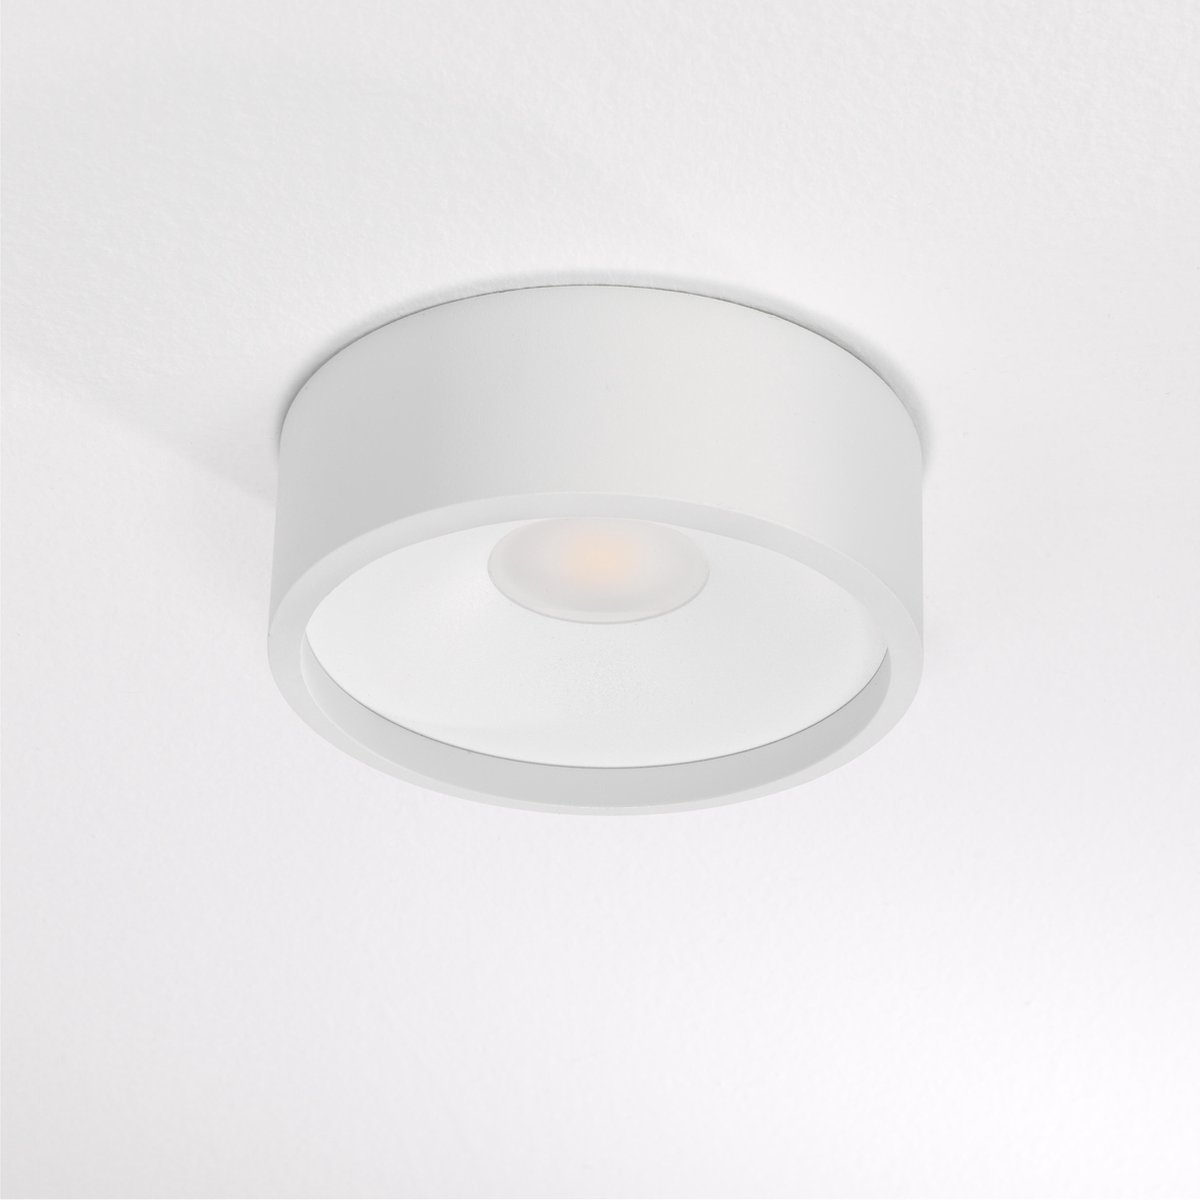 LANOR Opbouwspot LED 1x10W/1000lm Wit